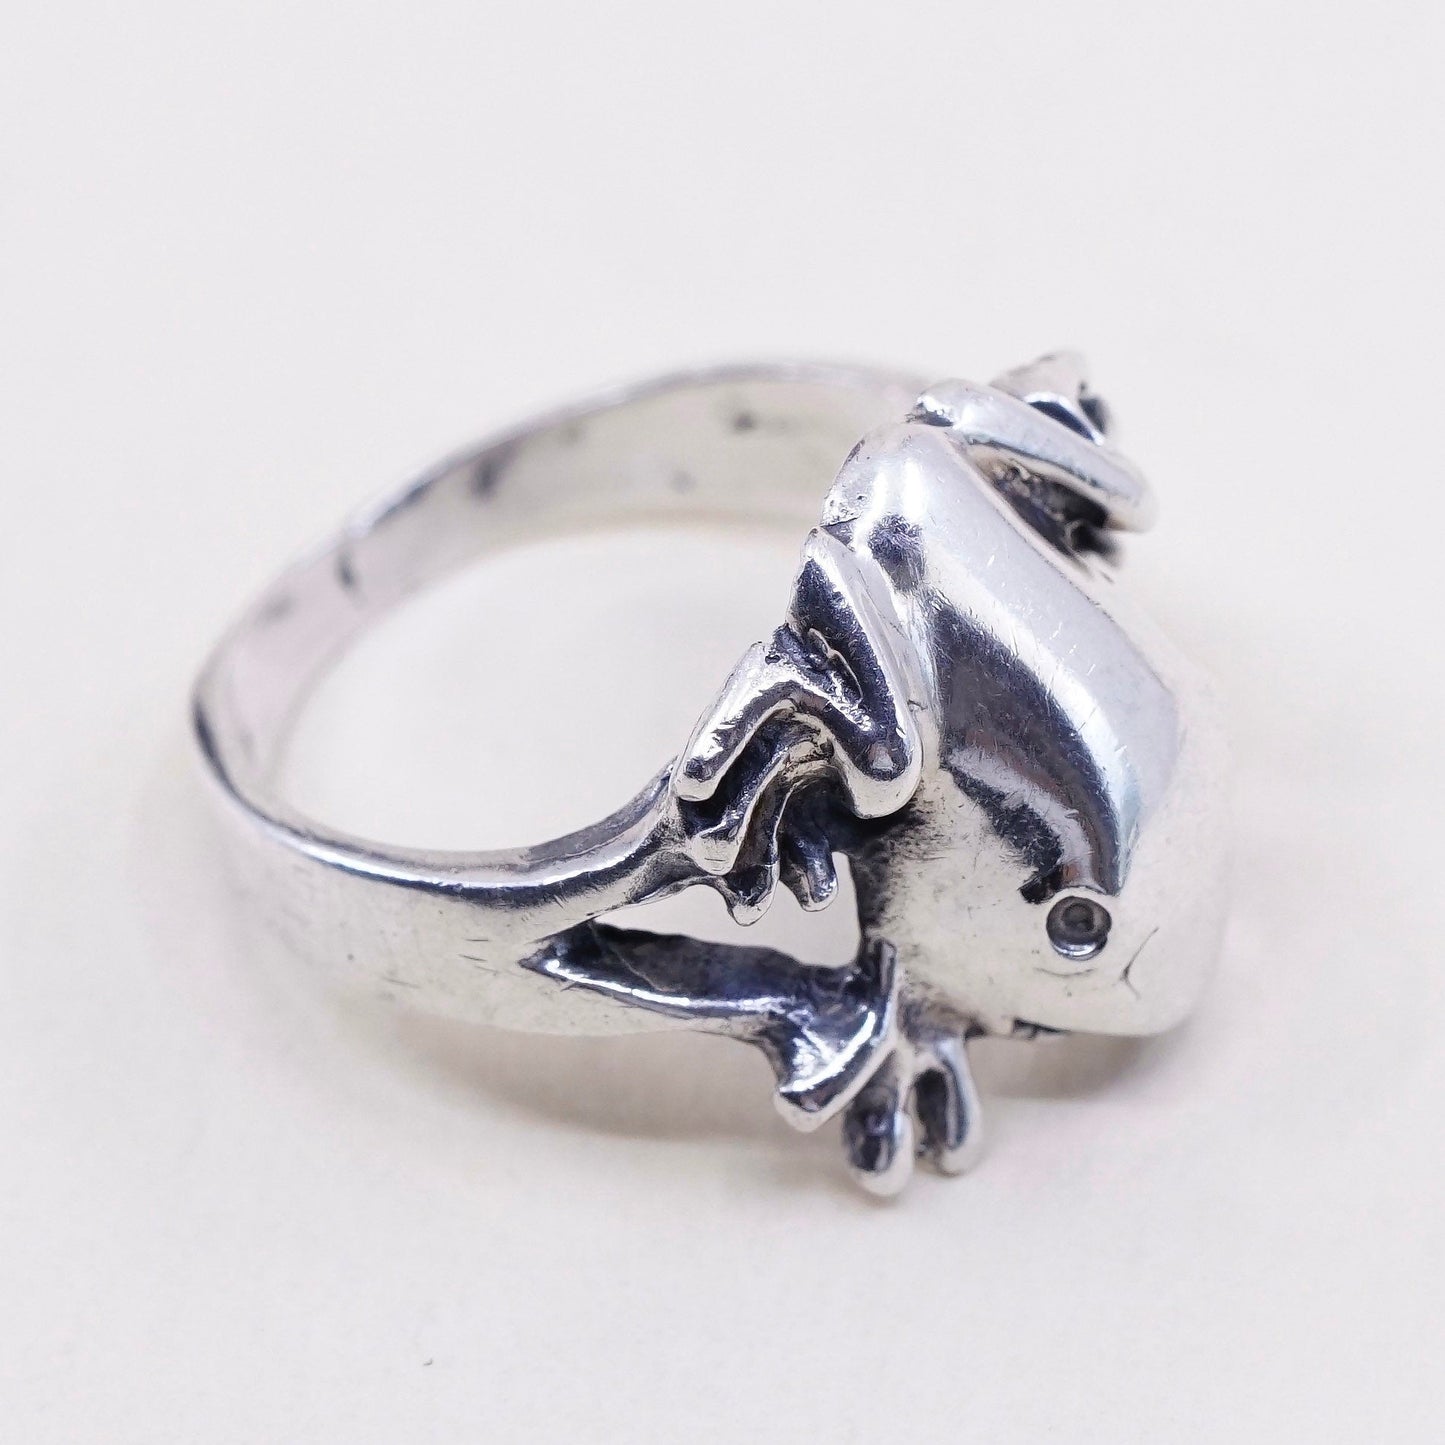 Size 7.5 vintage mexico sterling 925 silver handmade ring with frog